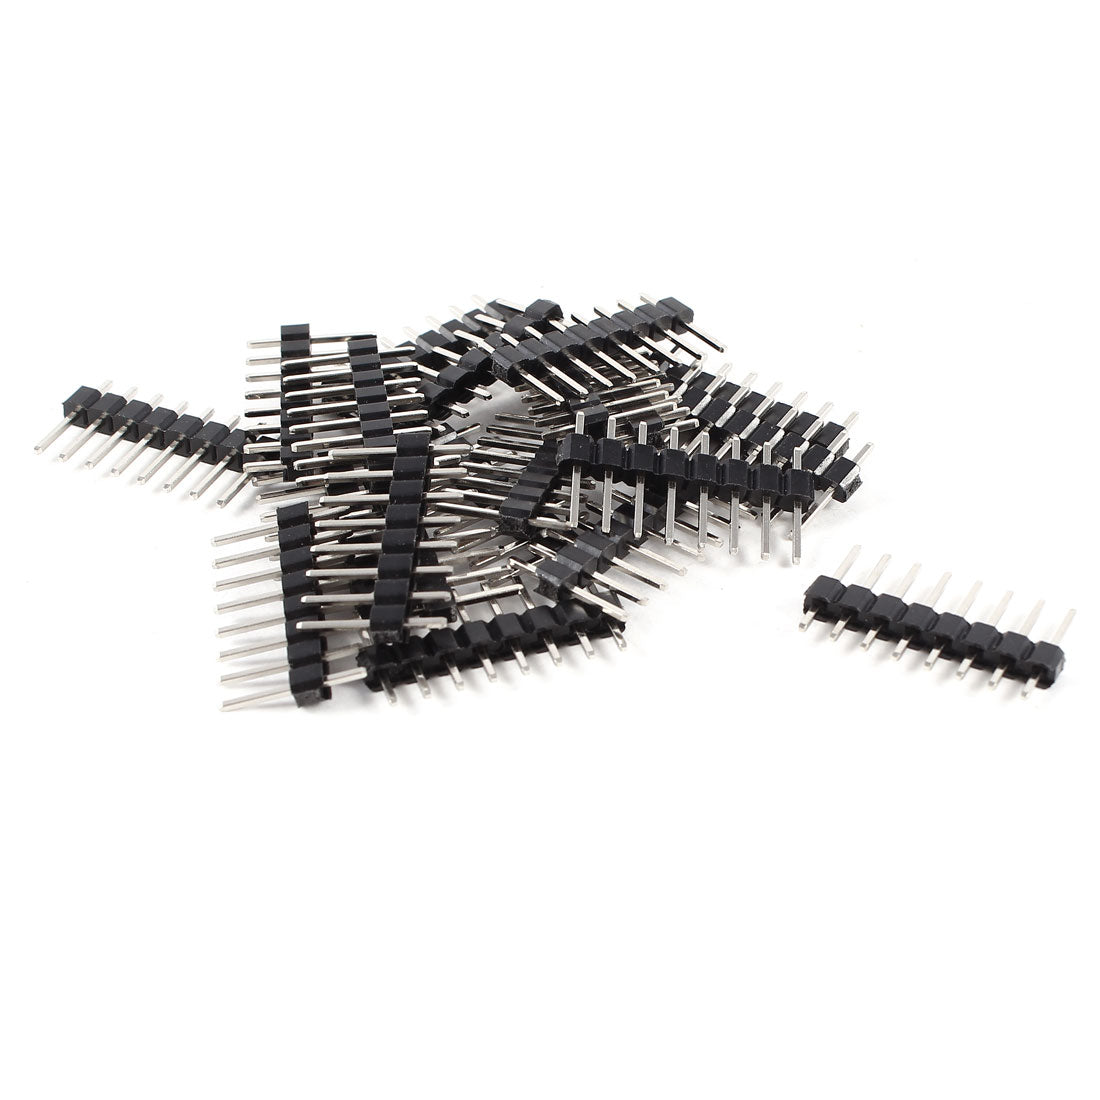 uxcell Uxcell 20 Pcs 2.54mm Pitch Single Row 1x8 8Pin Straight PCB Socket Connector Pin Headers